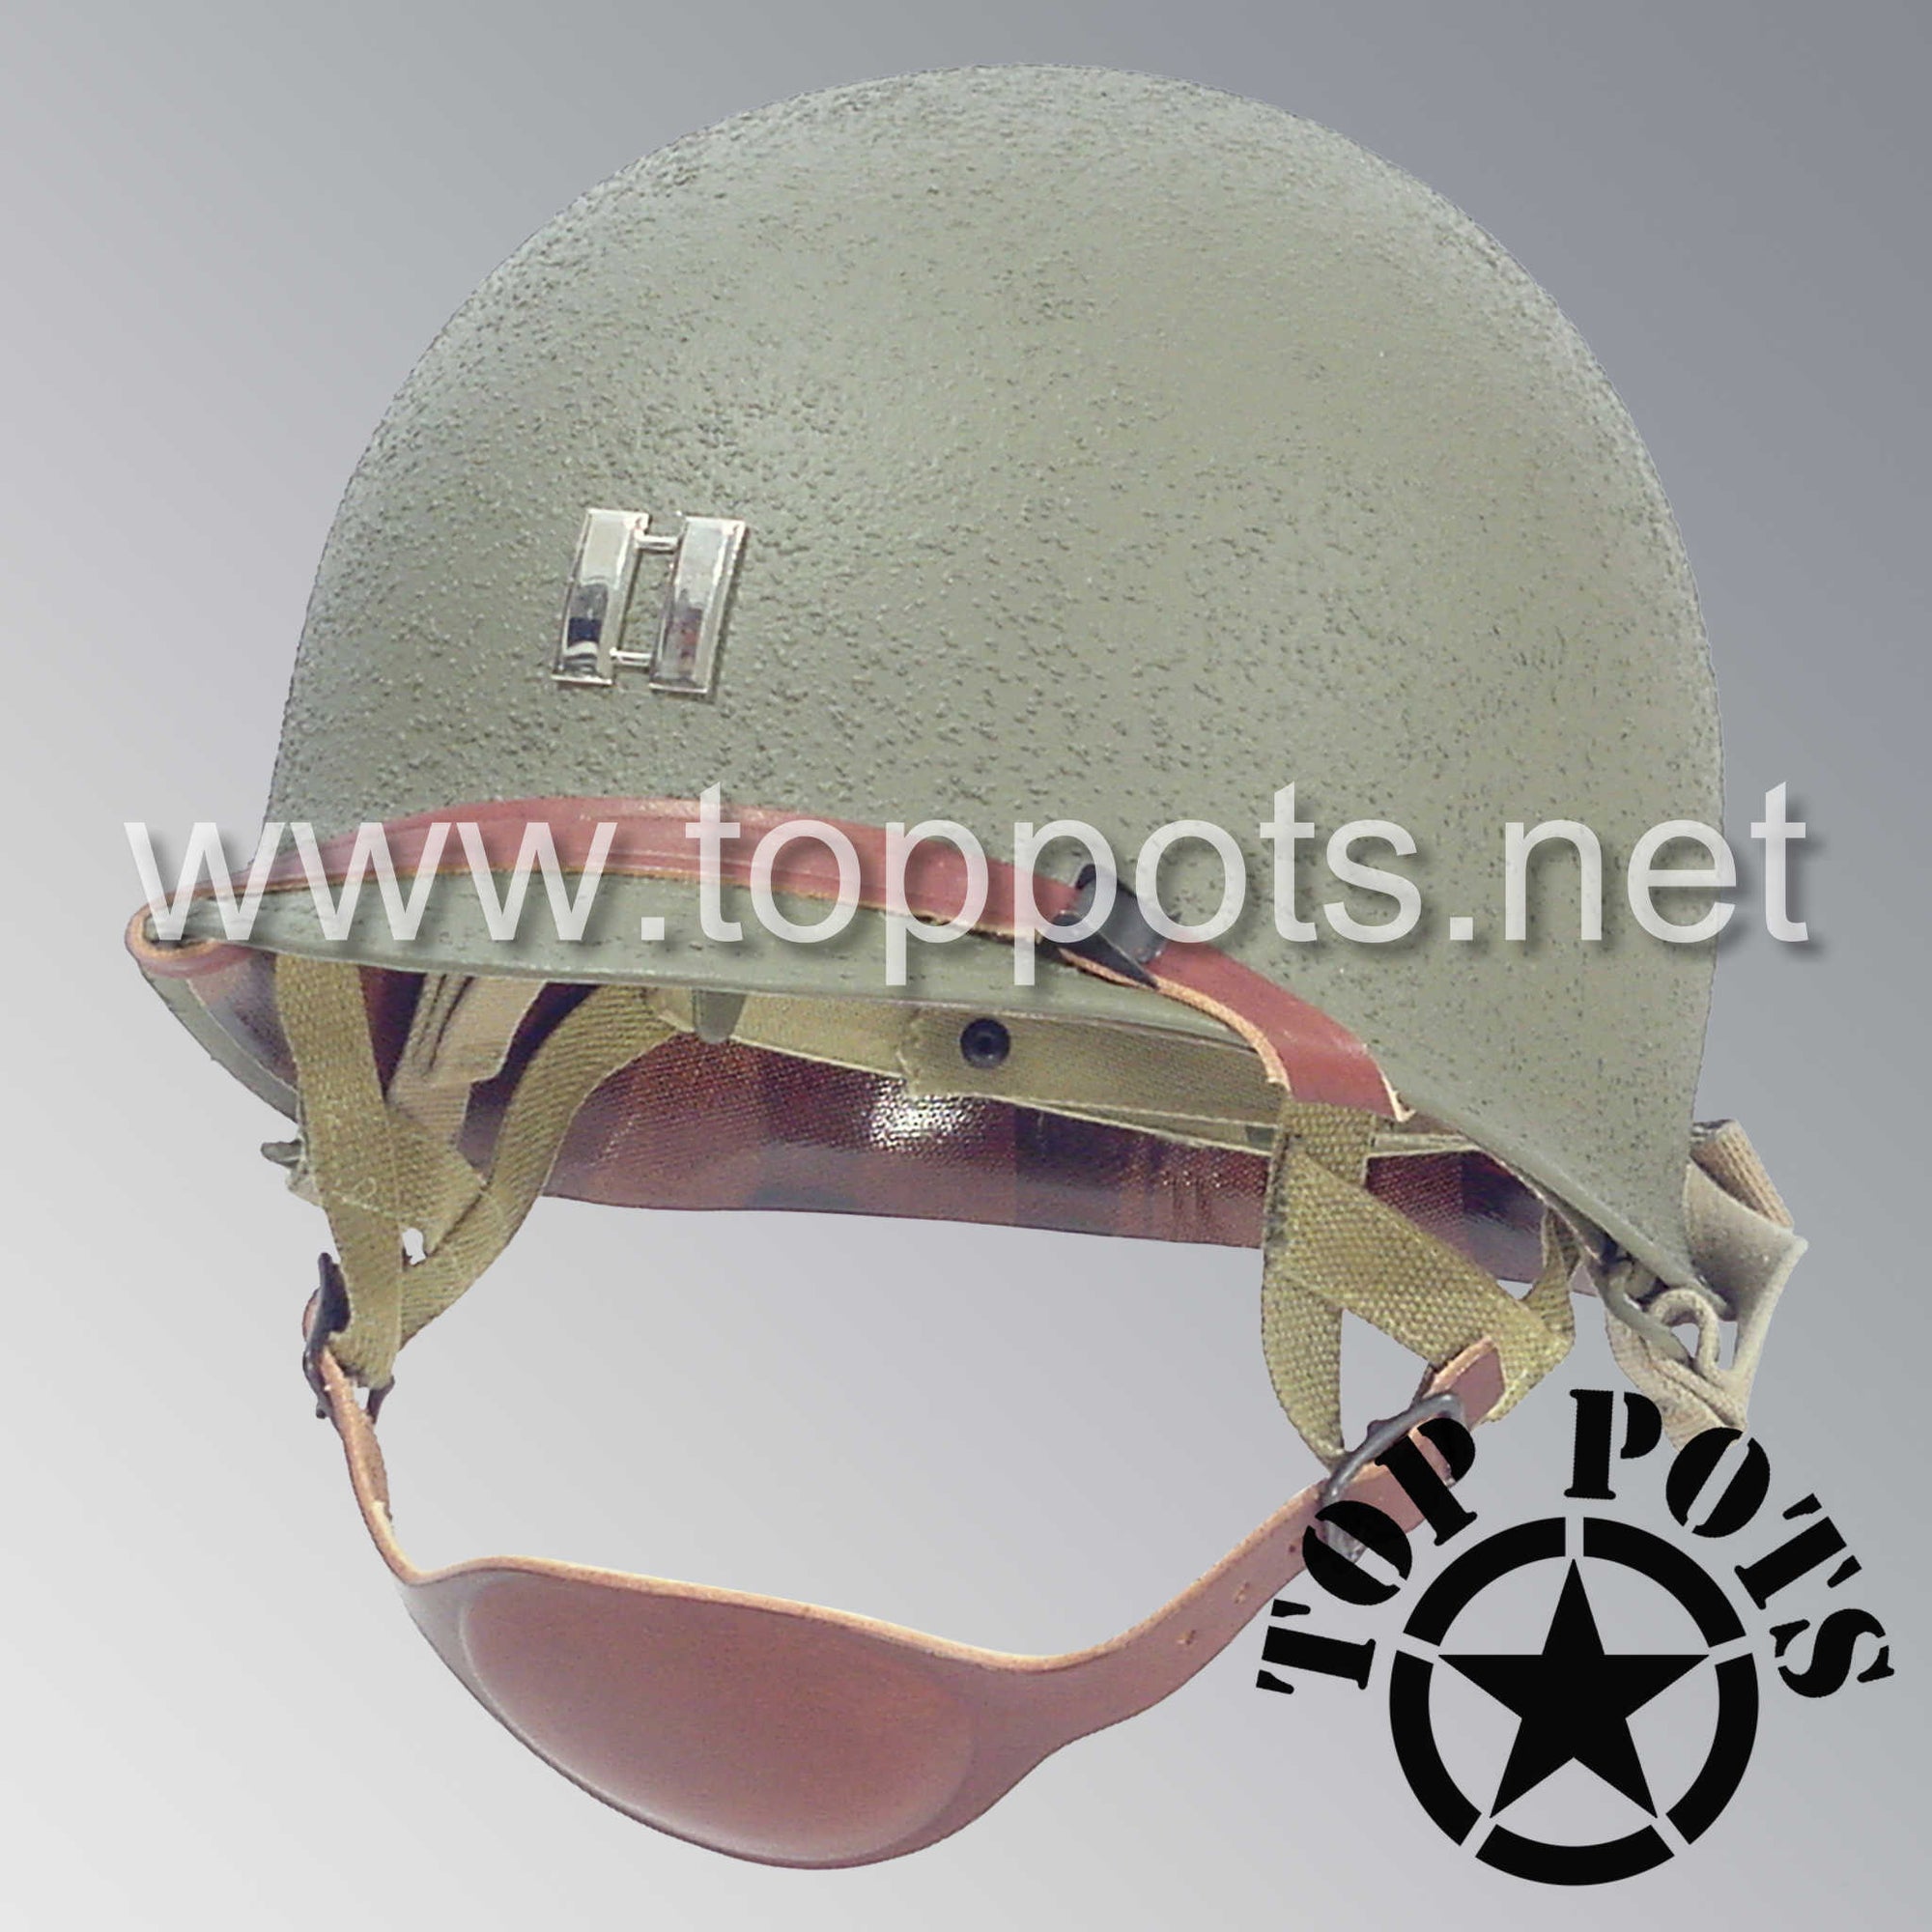 WWII US Army Restored Original M1C Paratrooper Airborne Helmet Swivel Bale Shell and Liner with Metal Captain Officer Rank Emblem